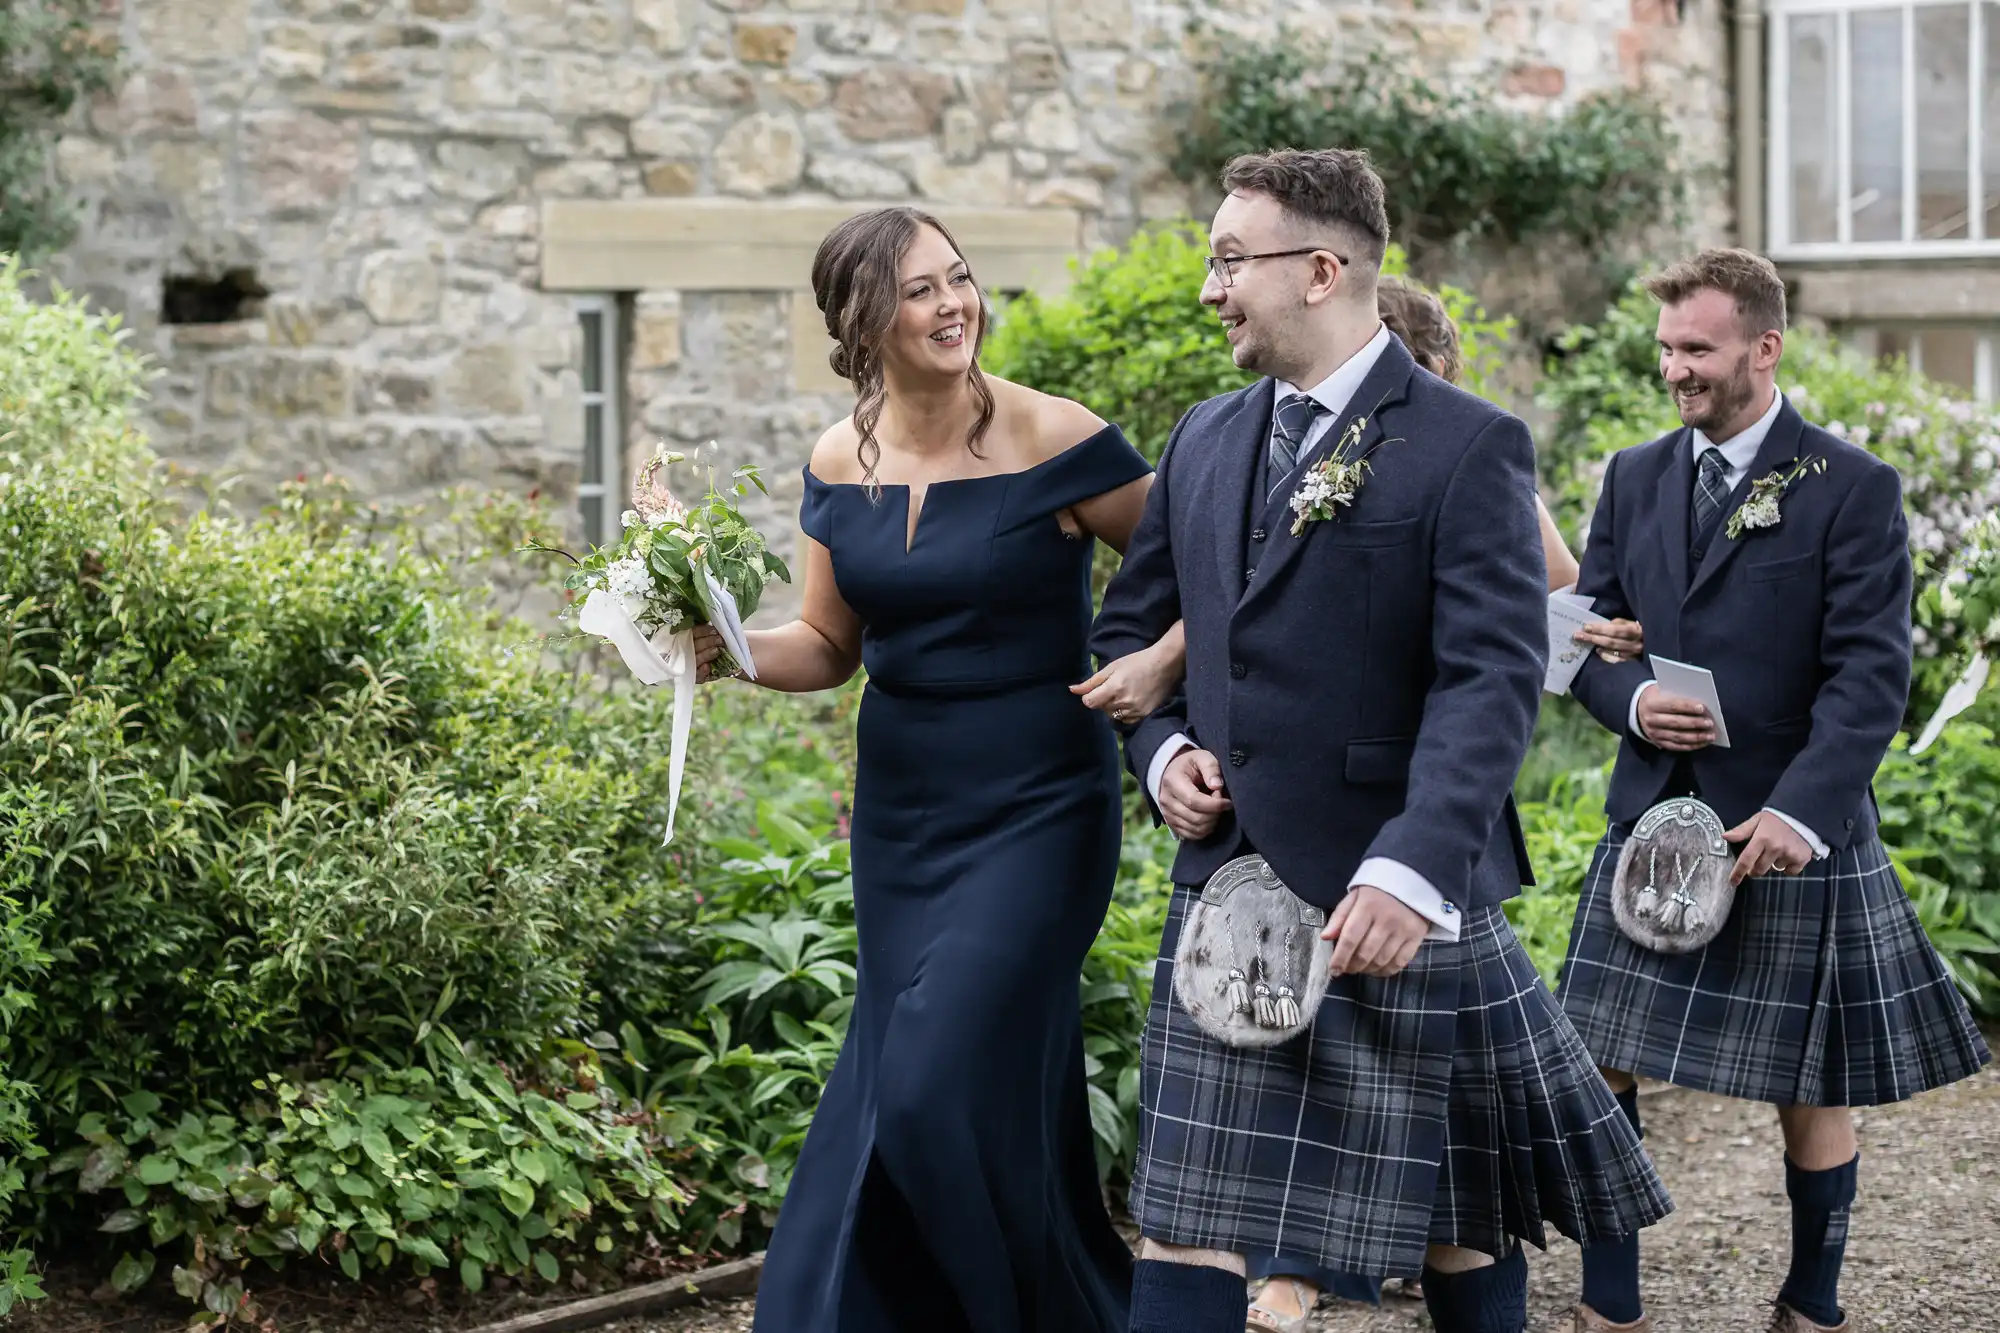 A bride in a blue dress holds hands with a groom in a kilt, laughing together with a man in a kilt and carrying a drink in the background, outside a stone building.